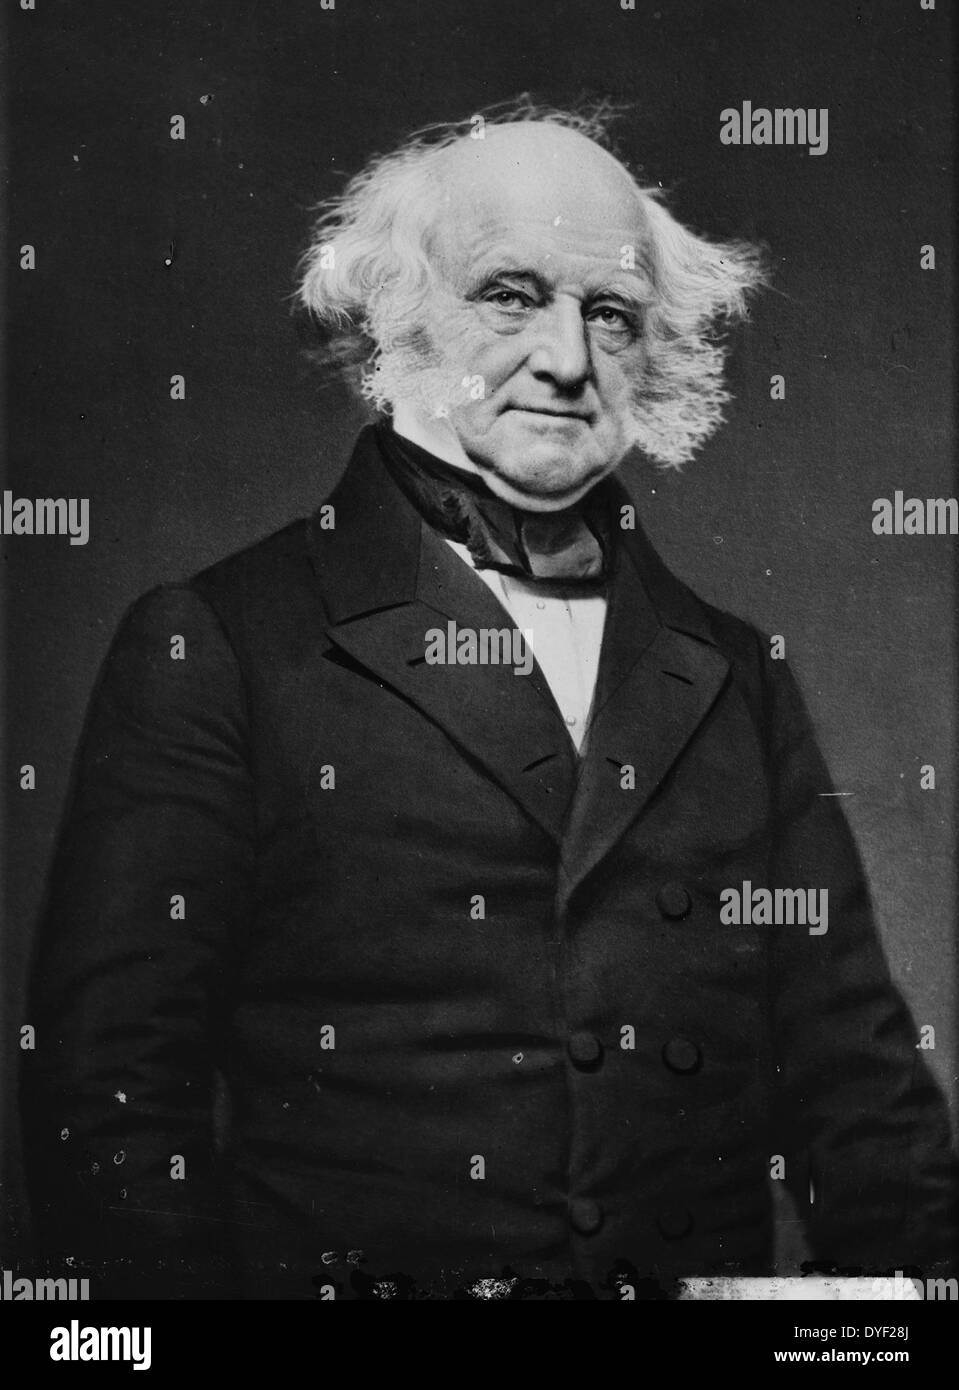 Martin Van Buren (December 5, 1782 – July 24, 1862) was the eighth President of the United States (1837–1841). Stock Photo